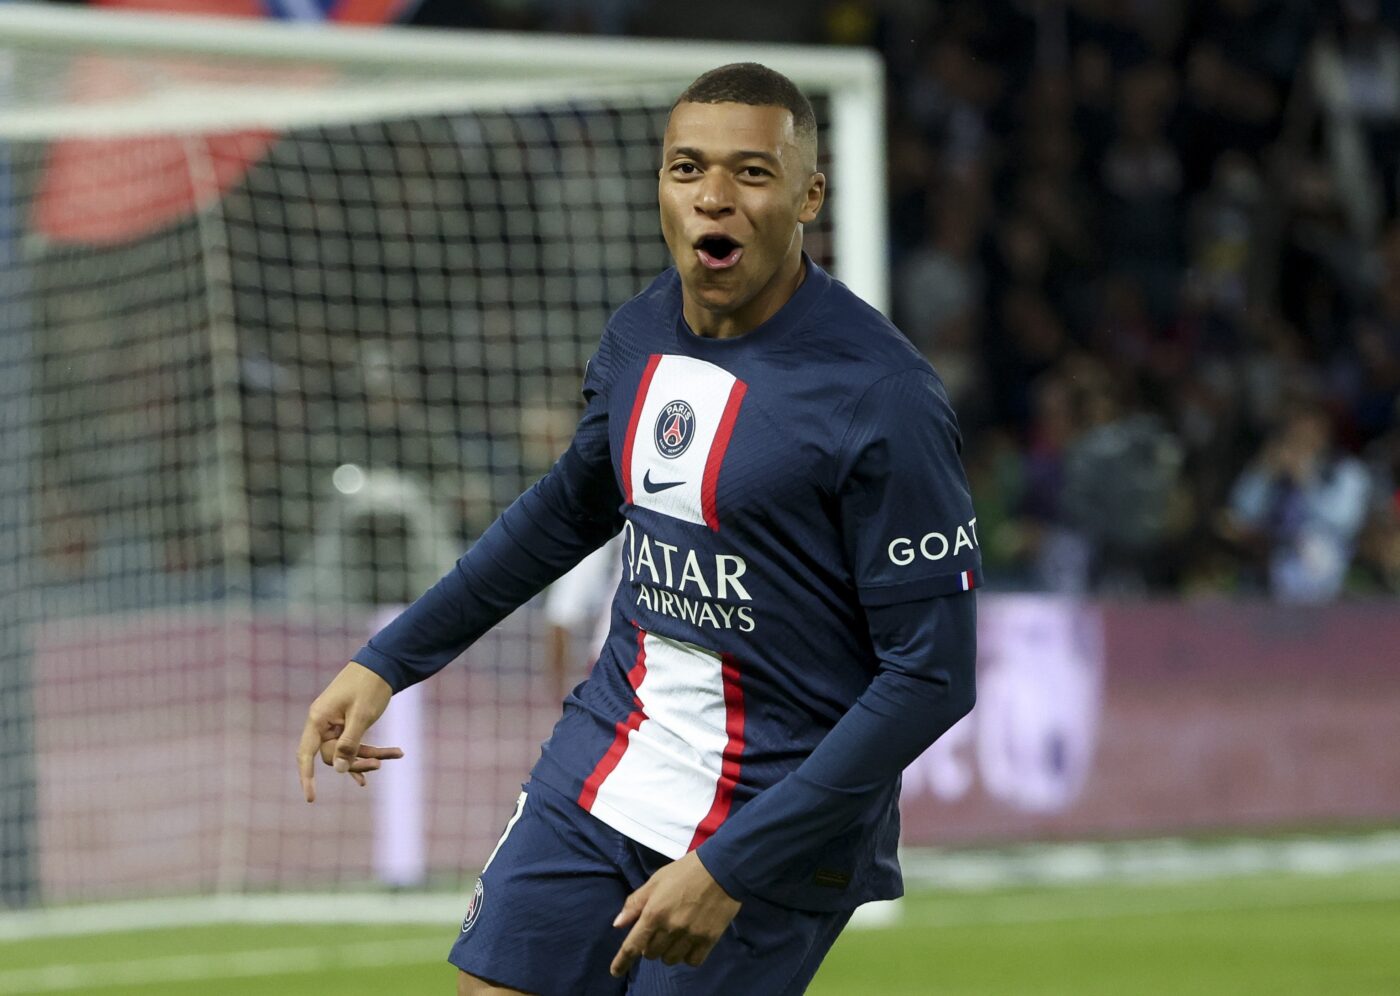 Kylian Mbappé Offered More Than $1 Billion Dollar-A-Year Saudi Contract